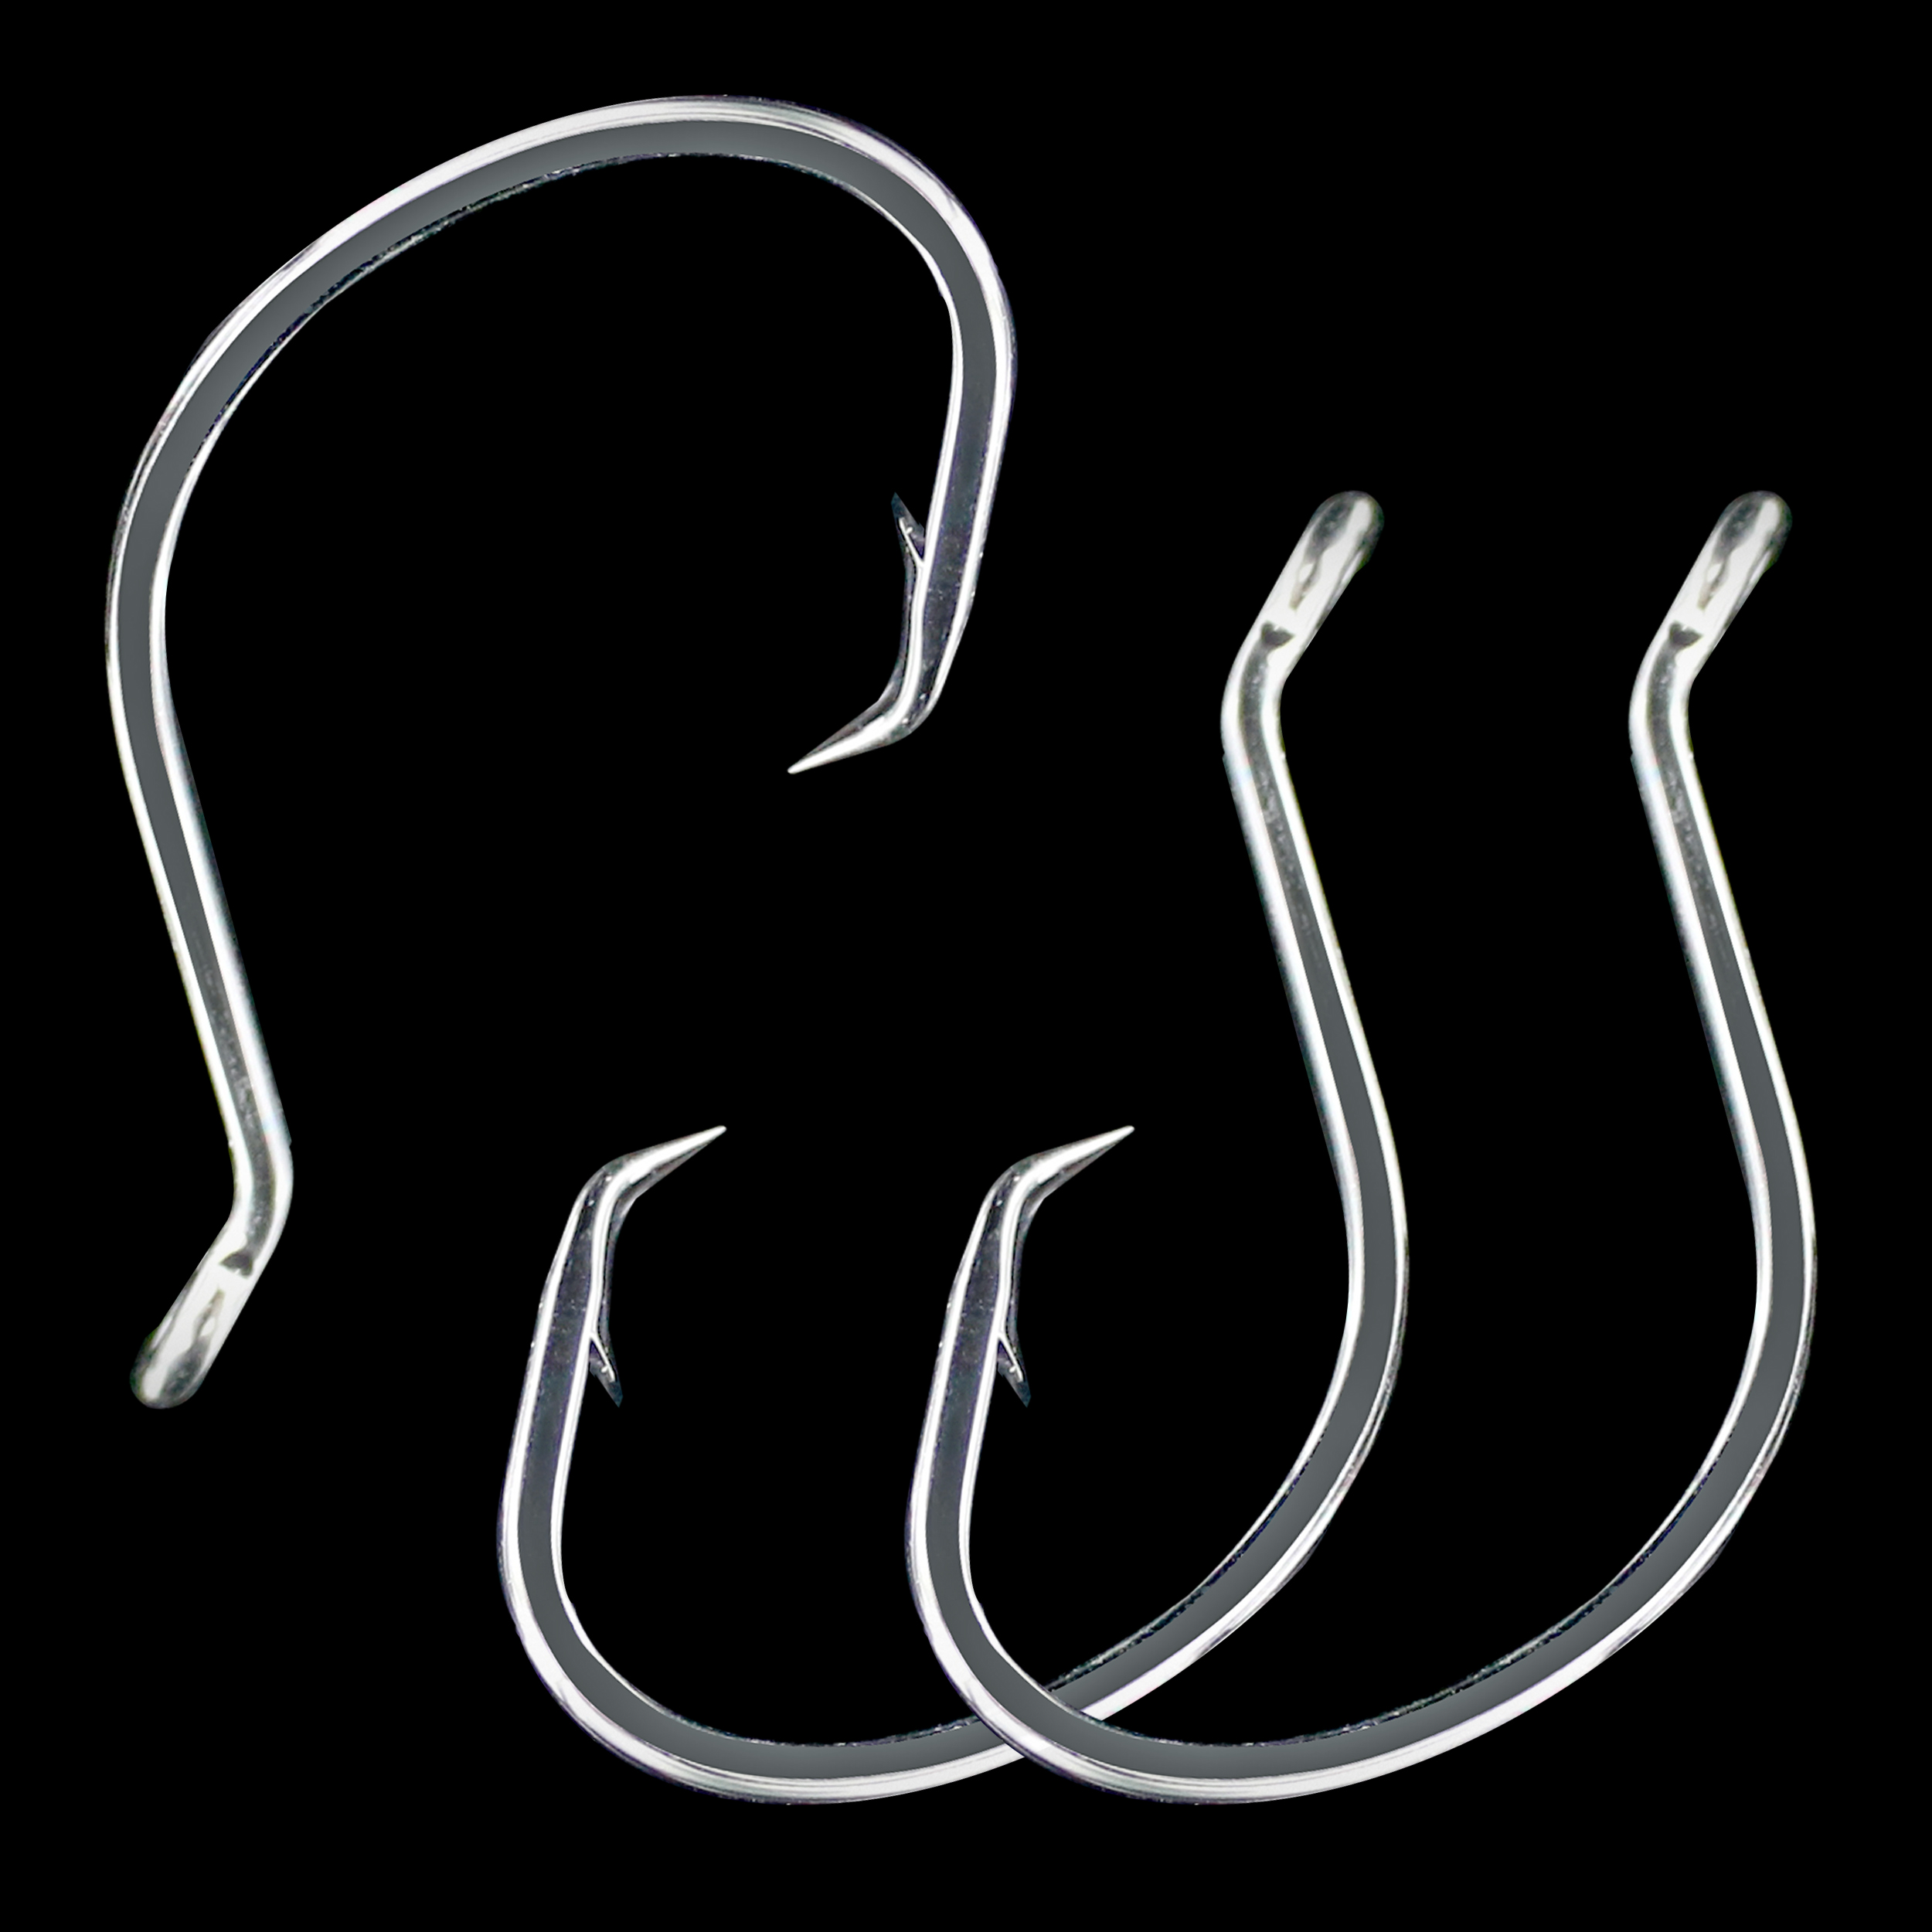 1200 Pcs/Box Fishing Hooks Stuff High Carbon Steel Catfish Circle Hooks  Mixed Size Barbed Jig Hook Tackle for Saltwater 